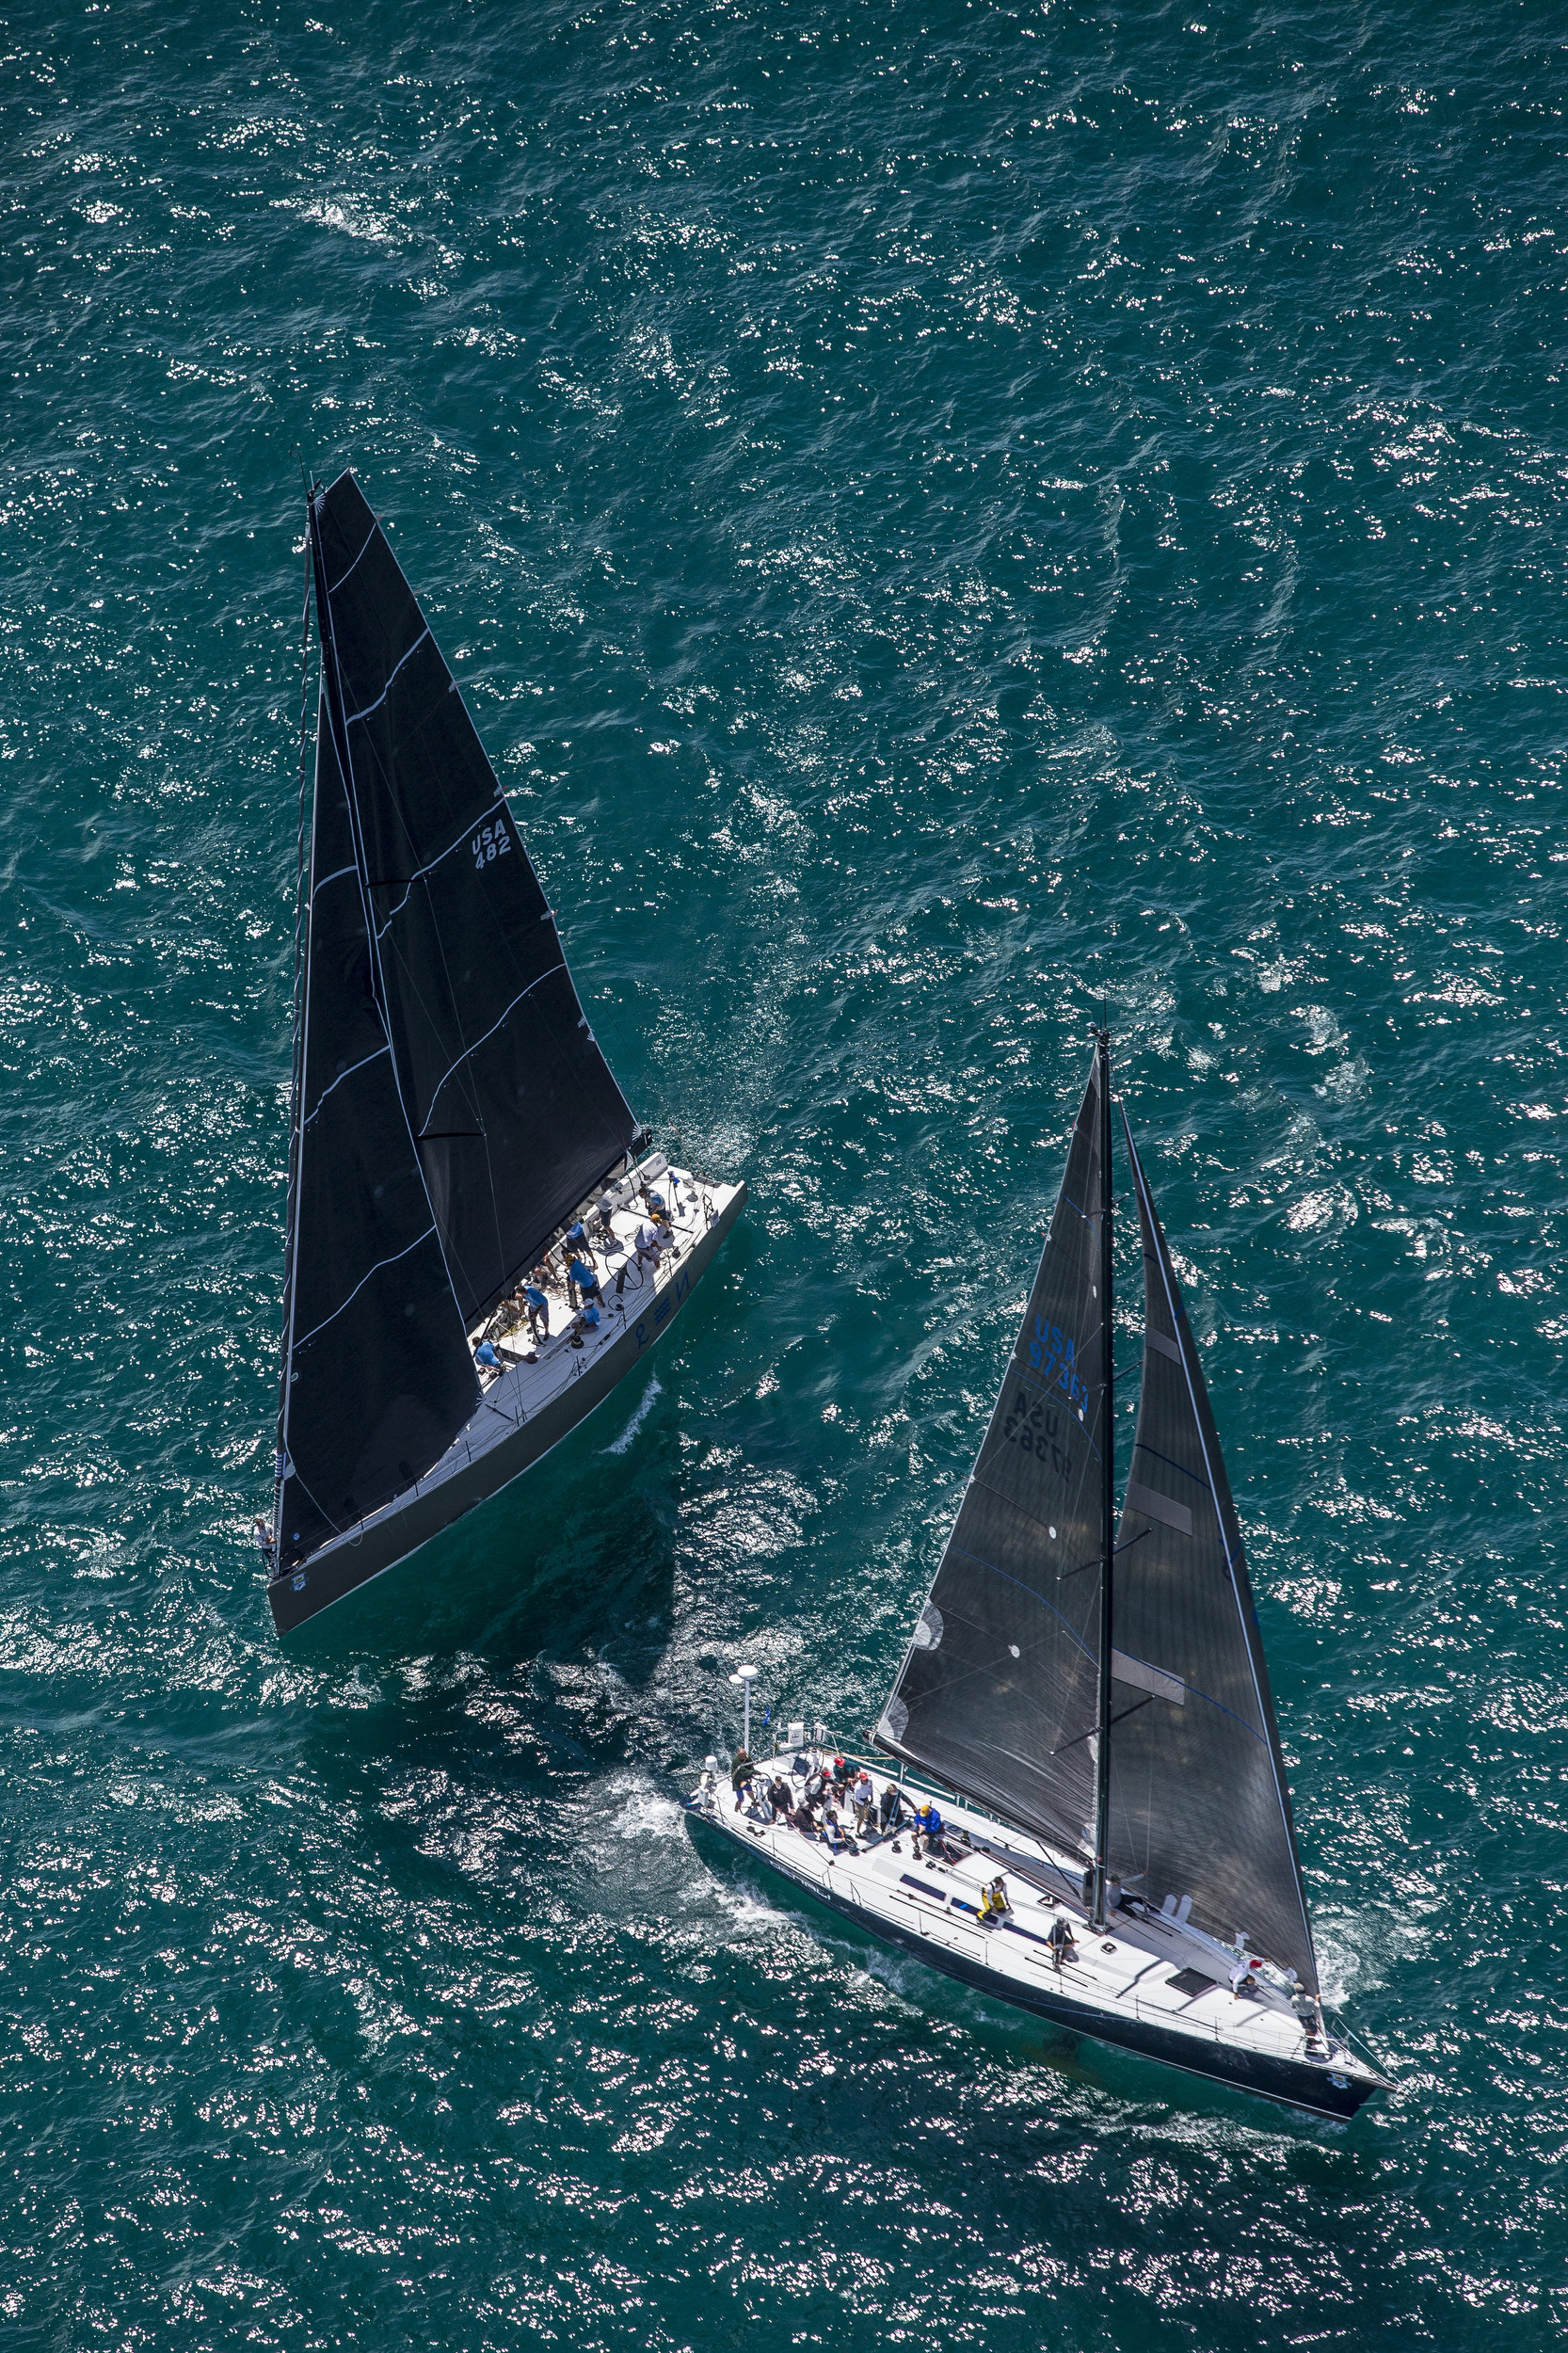 An aerial view of sailboats